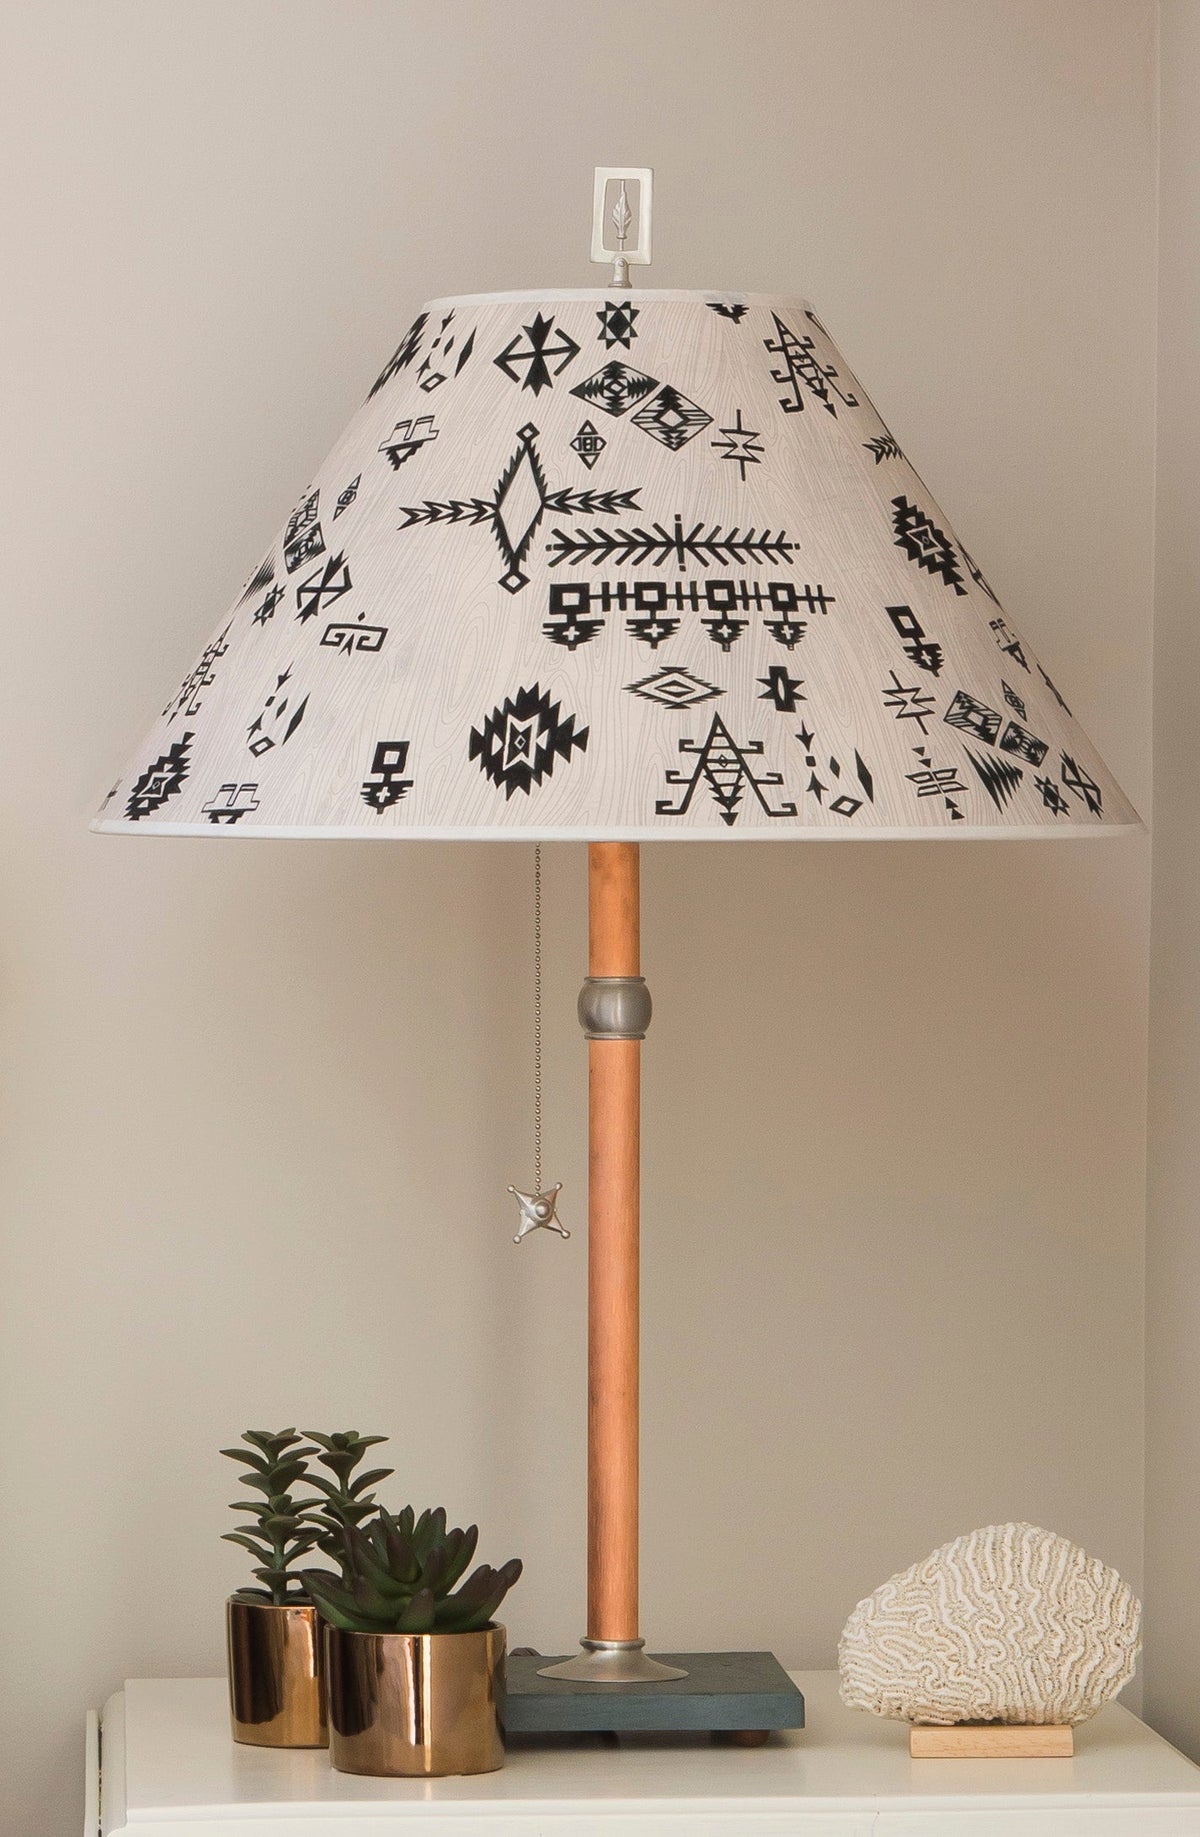 Janna Ugone &amp; Co Table Lamps Copper Table Lamp with Large Conical Shade in Blanket Sketch